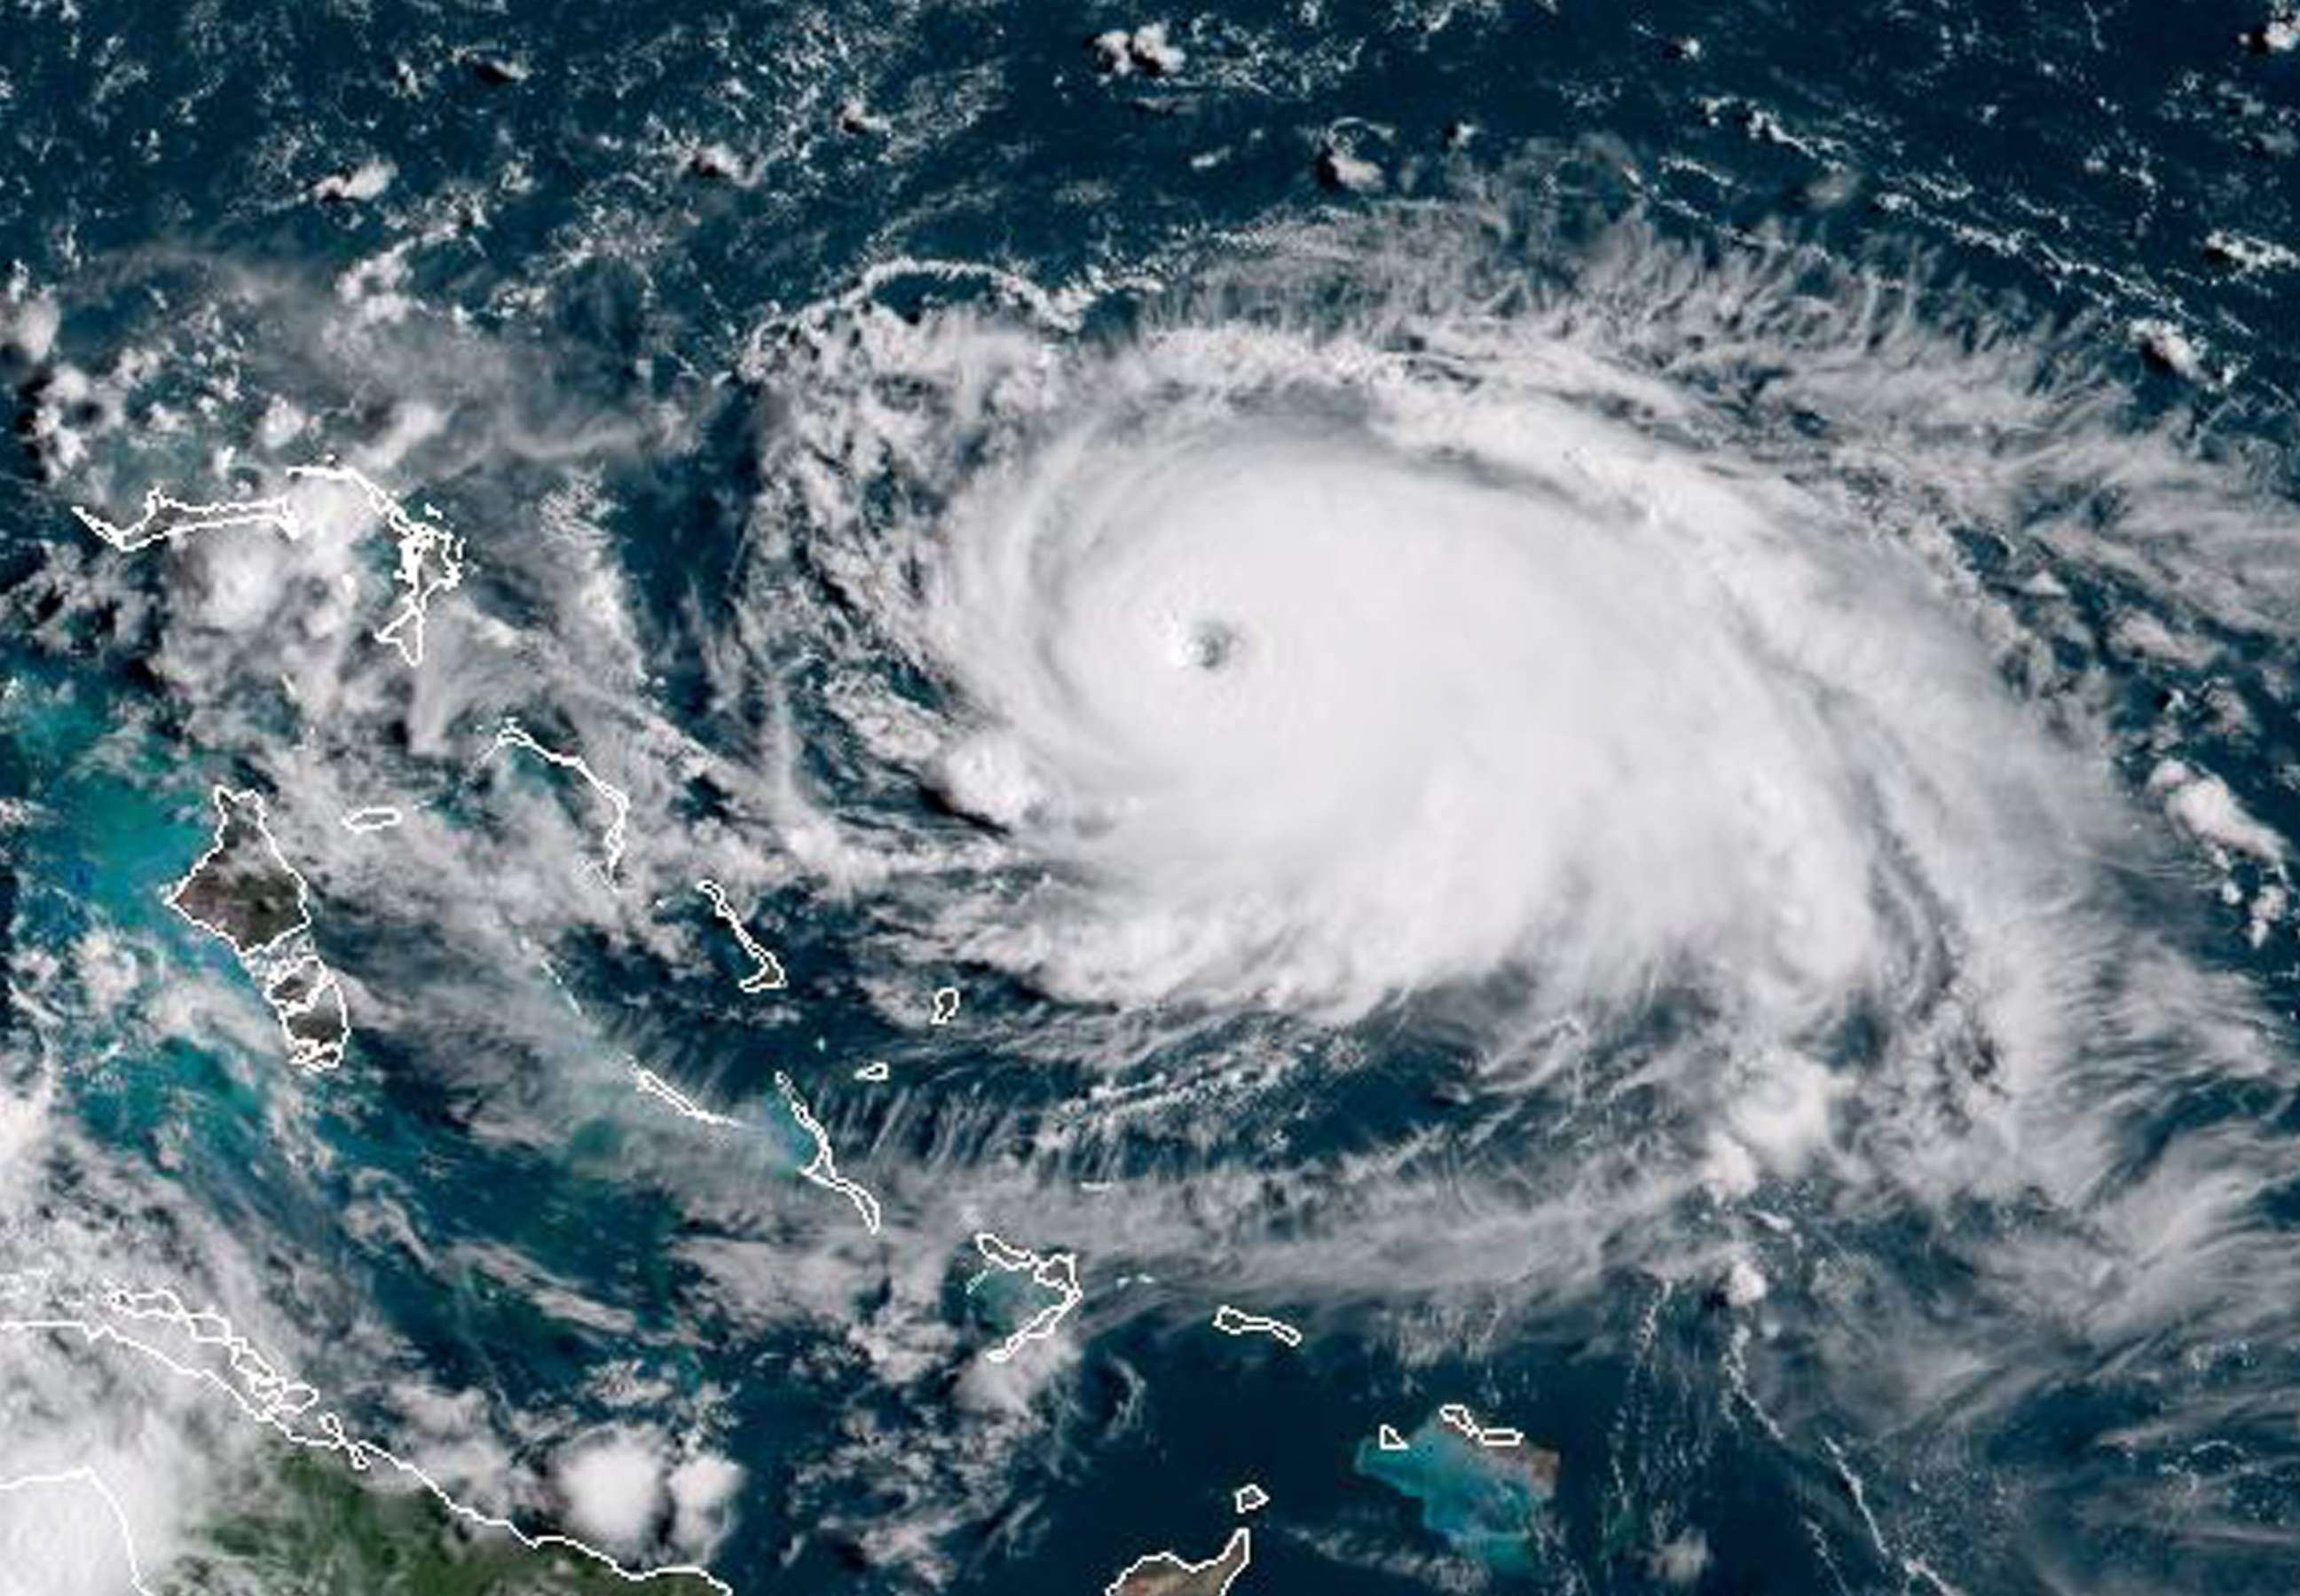 PHOTO: This satellite image obtained from NOAA/RAMMB, shows Tropical Storm Dorian as it approaching the Bahamas and Florida at 13:430UTC on August 31, 2019.